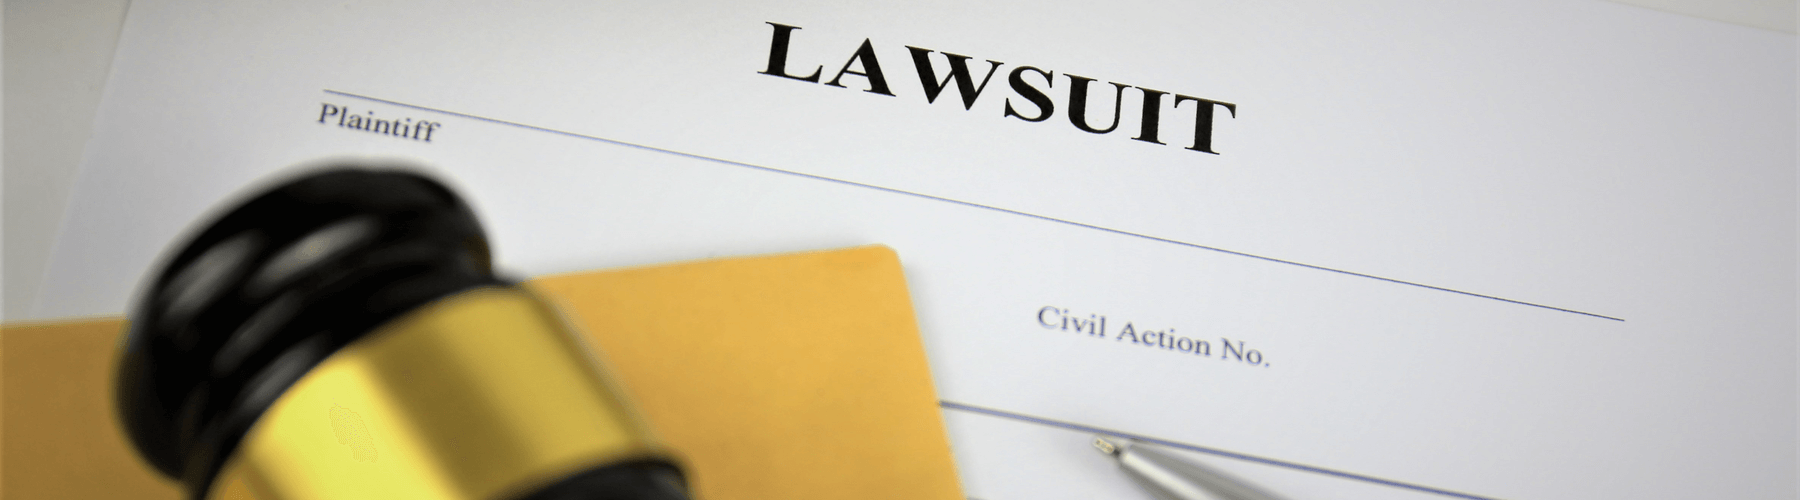 Pen and gavel on lawsuit papers